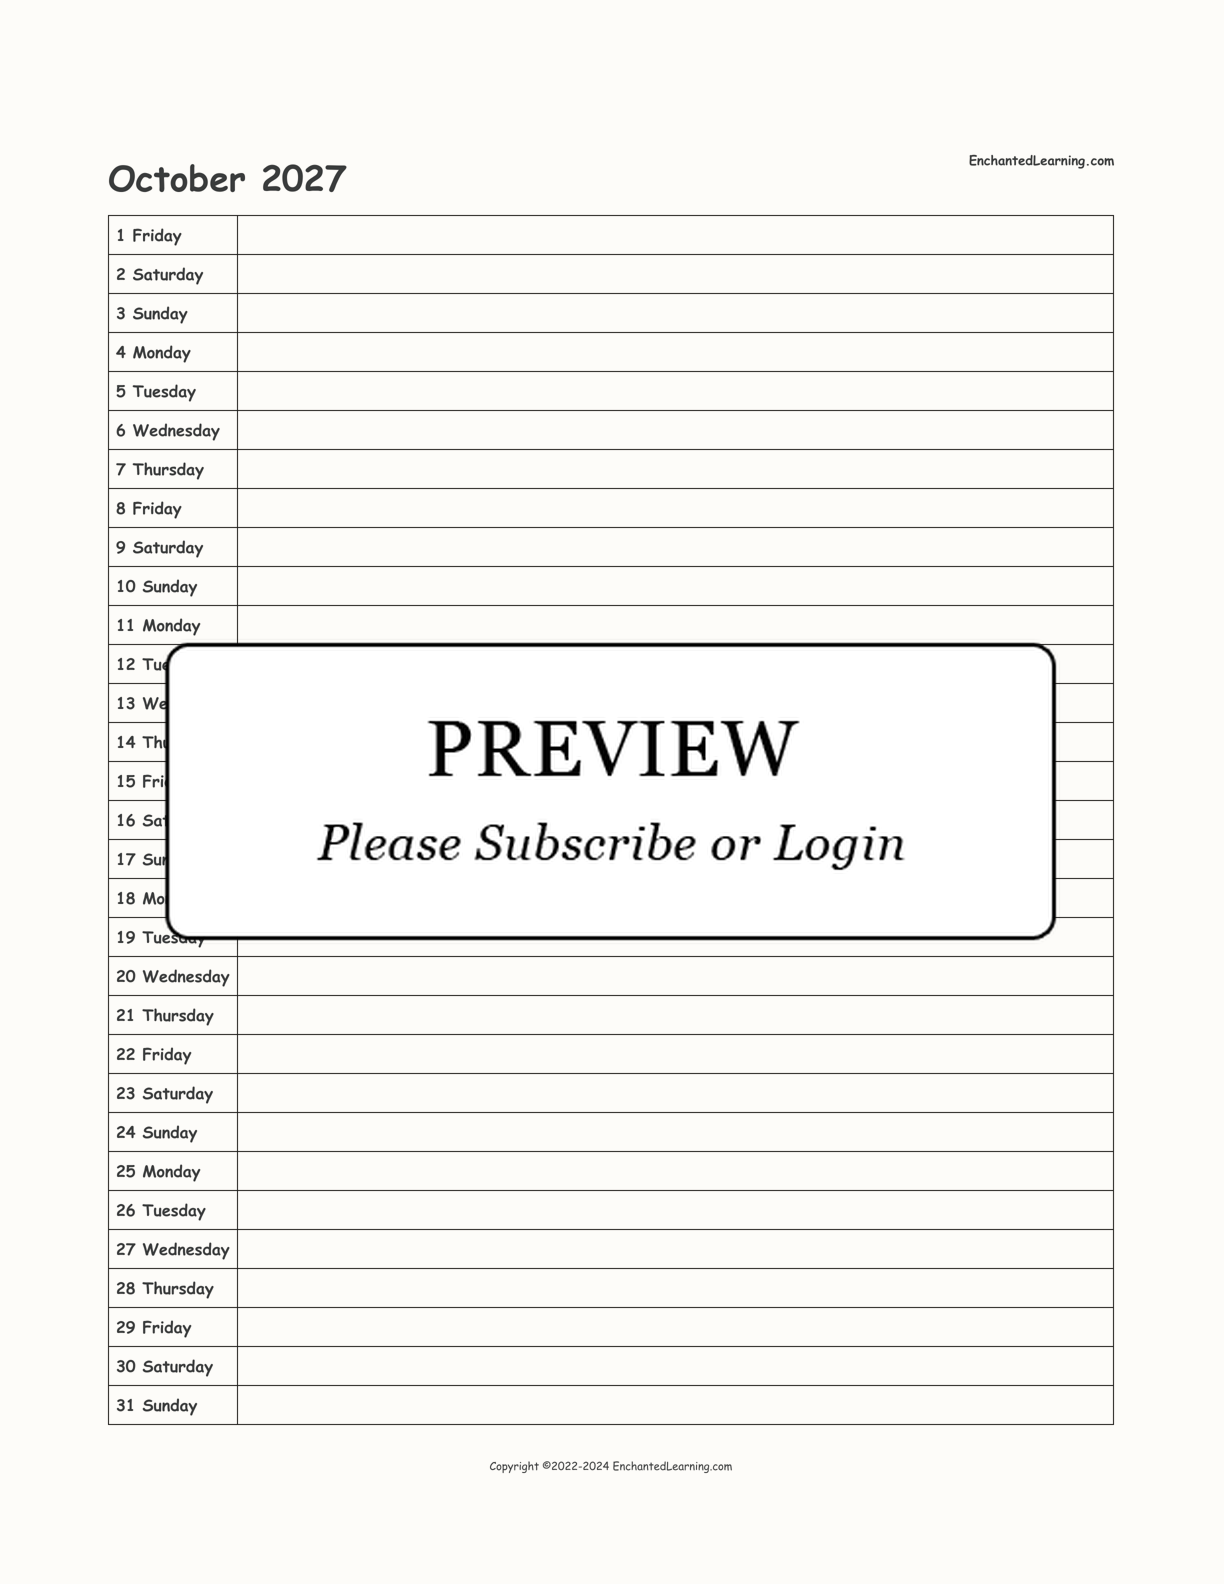 2027 Scheduling Calendar interactive printout page 10